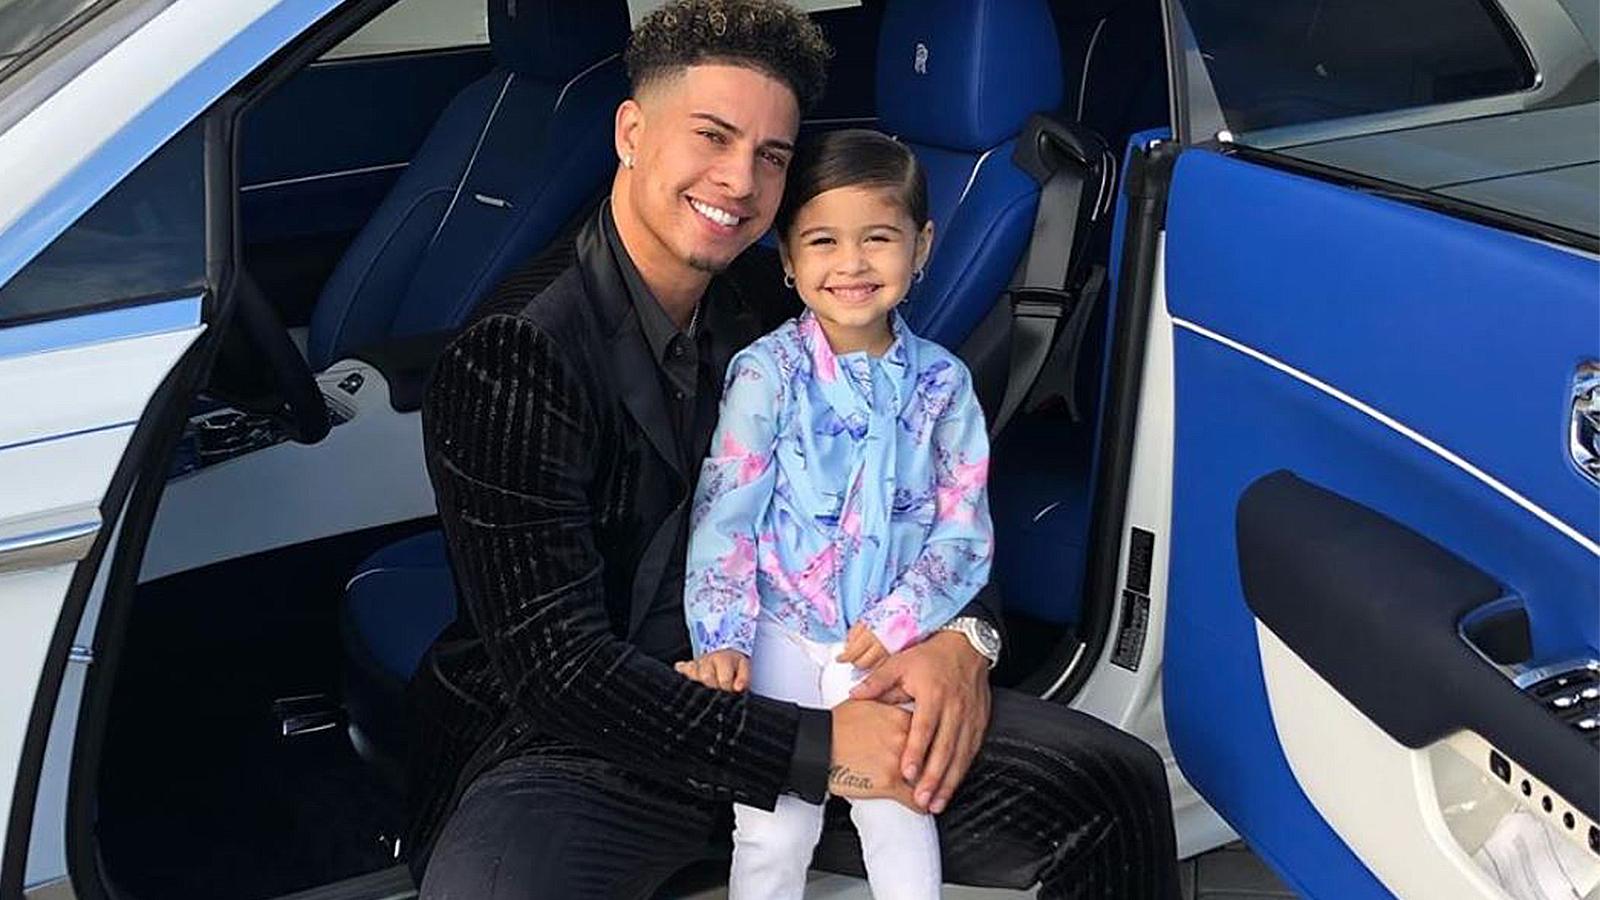 ACE Family's Austin McBroom poses with daughter Elle in a car.